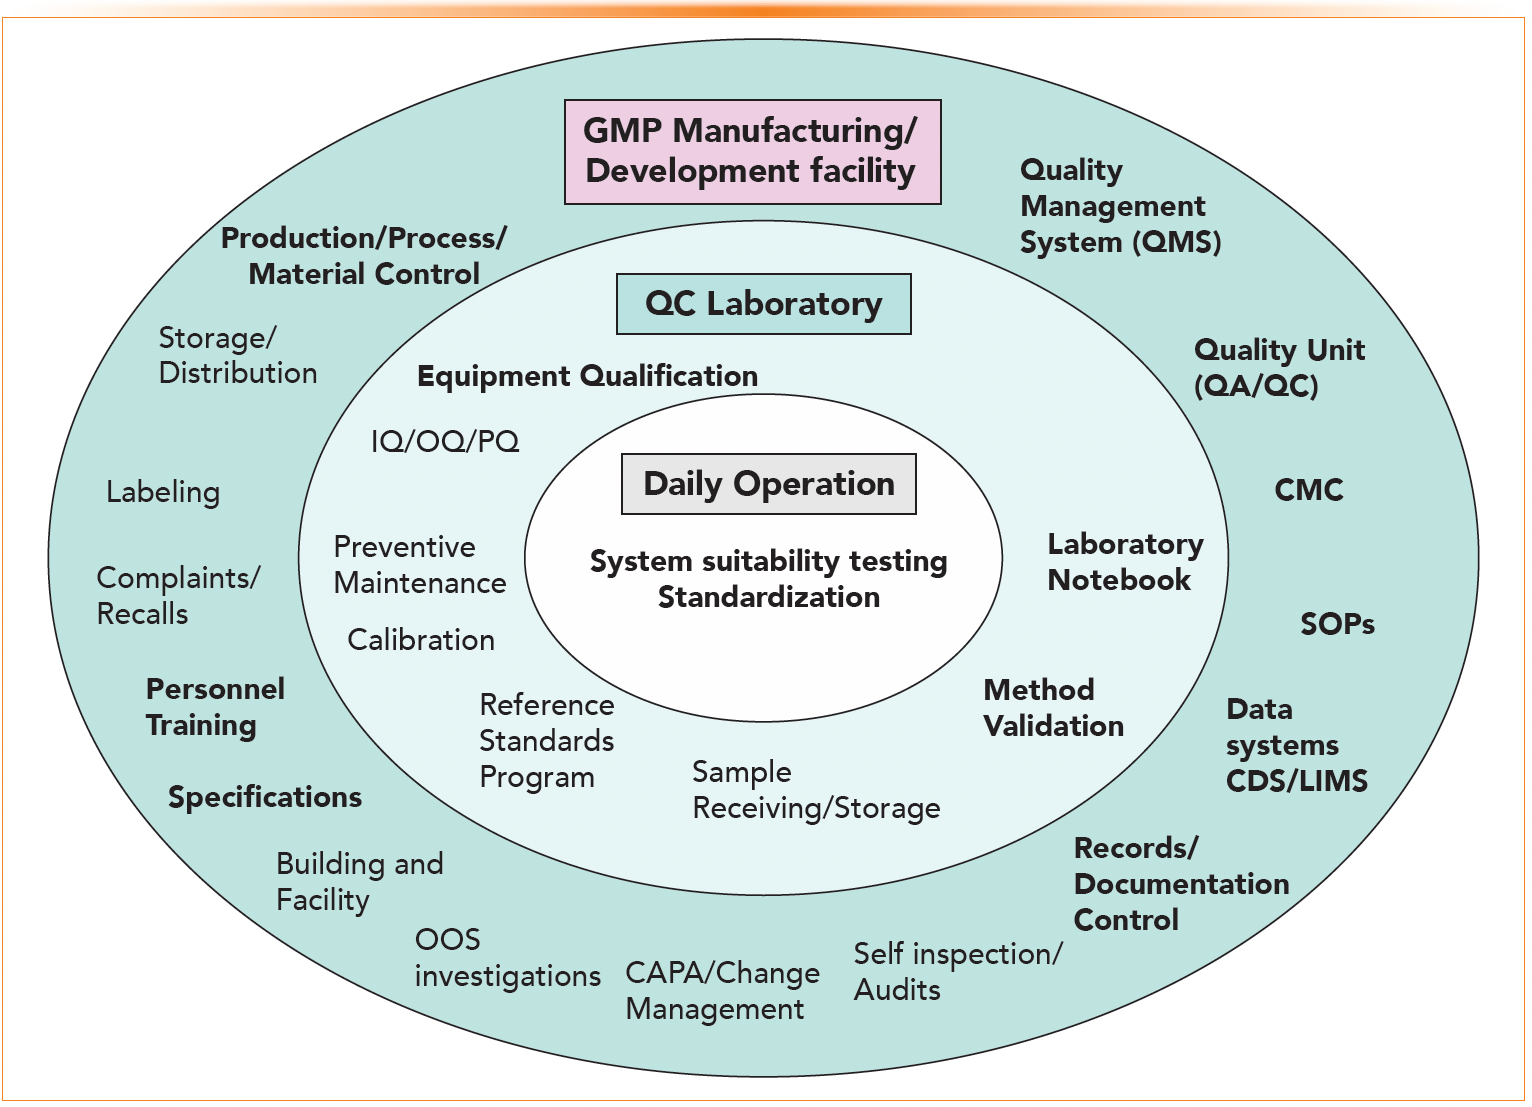 FIGURE 2: An example of the organizational structure of quality systems and processes in a GMP manufacturing and development facility, including within a QC laboratory. This figure is extracted from reference 10 and revised to include additional GMP components. Bold texts are components of more relevance in the workflow of QC analysts.